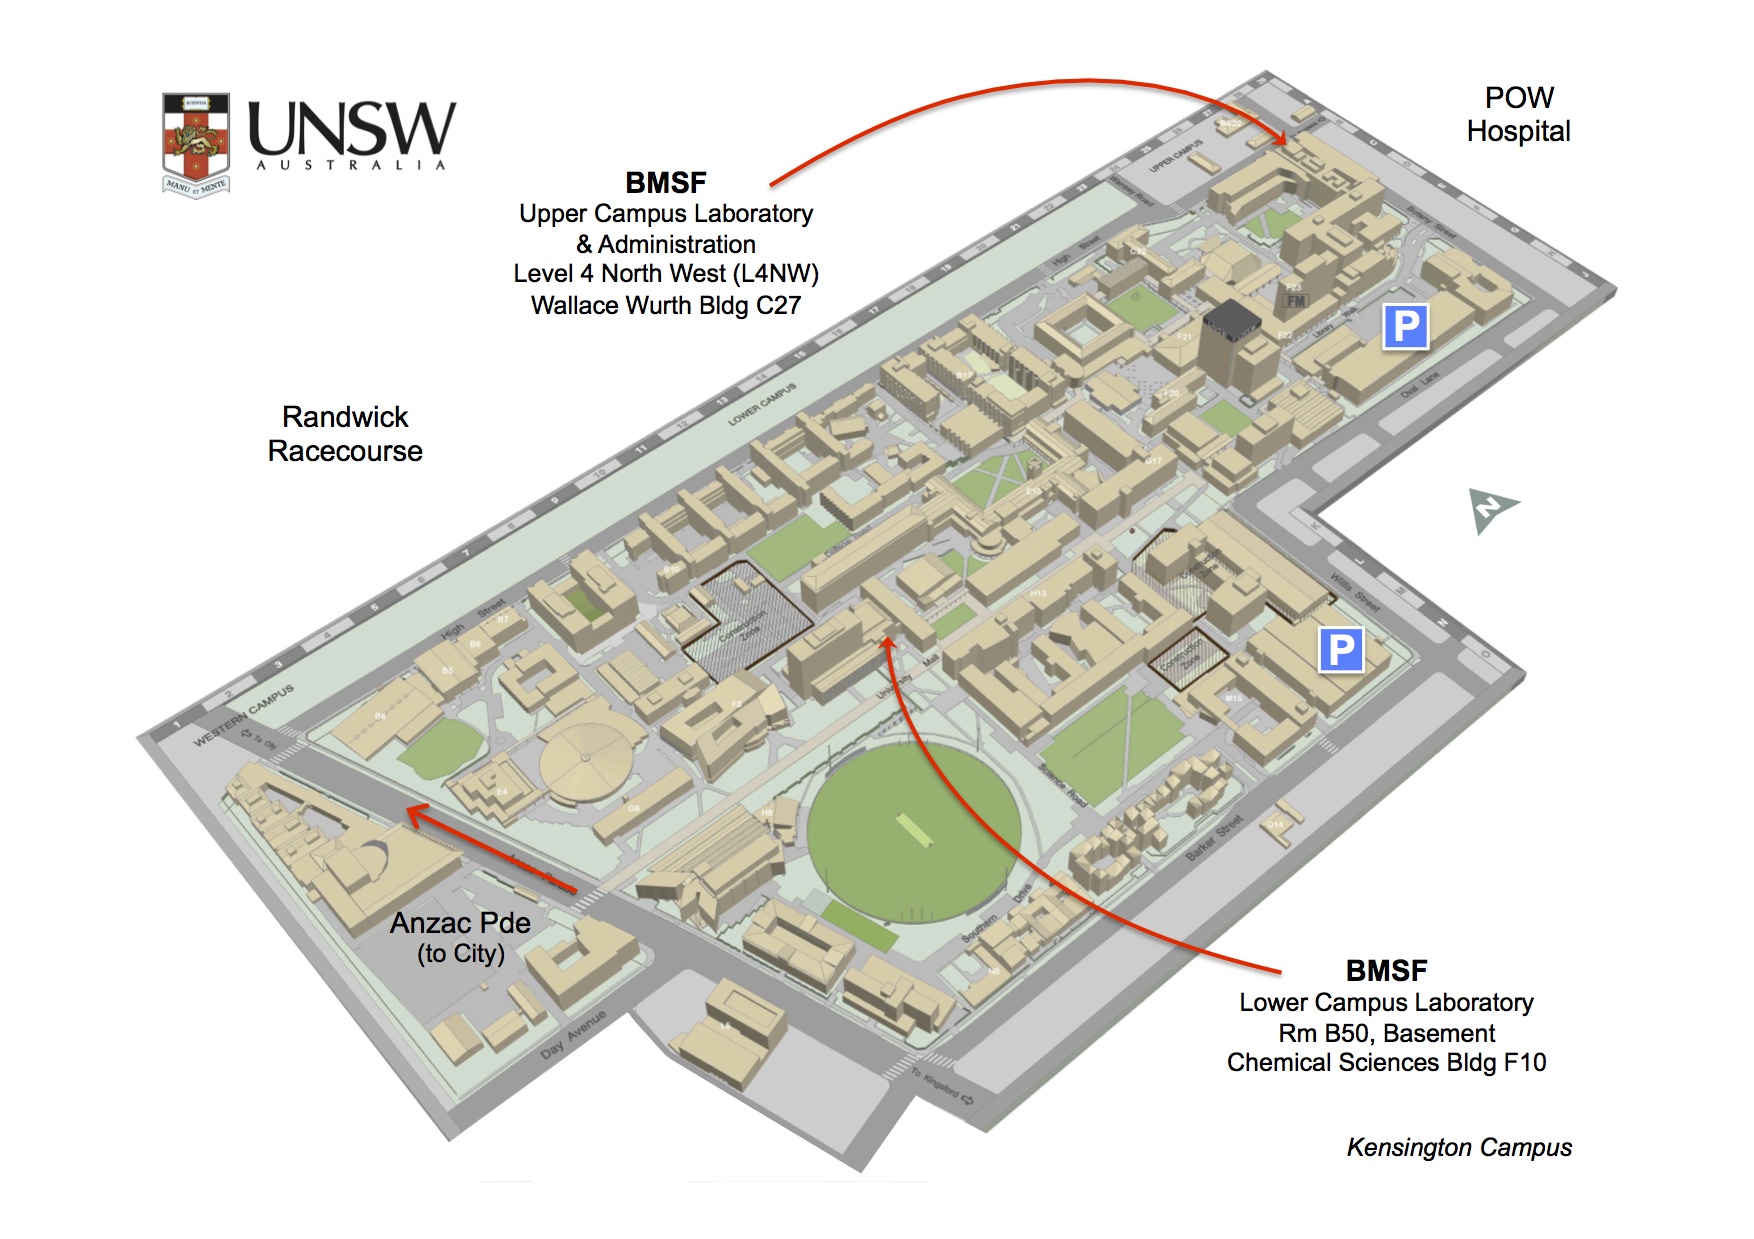 Kensington Campus Map - arrows indicate 2 locations for BMSF.